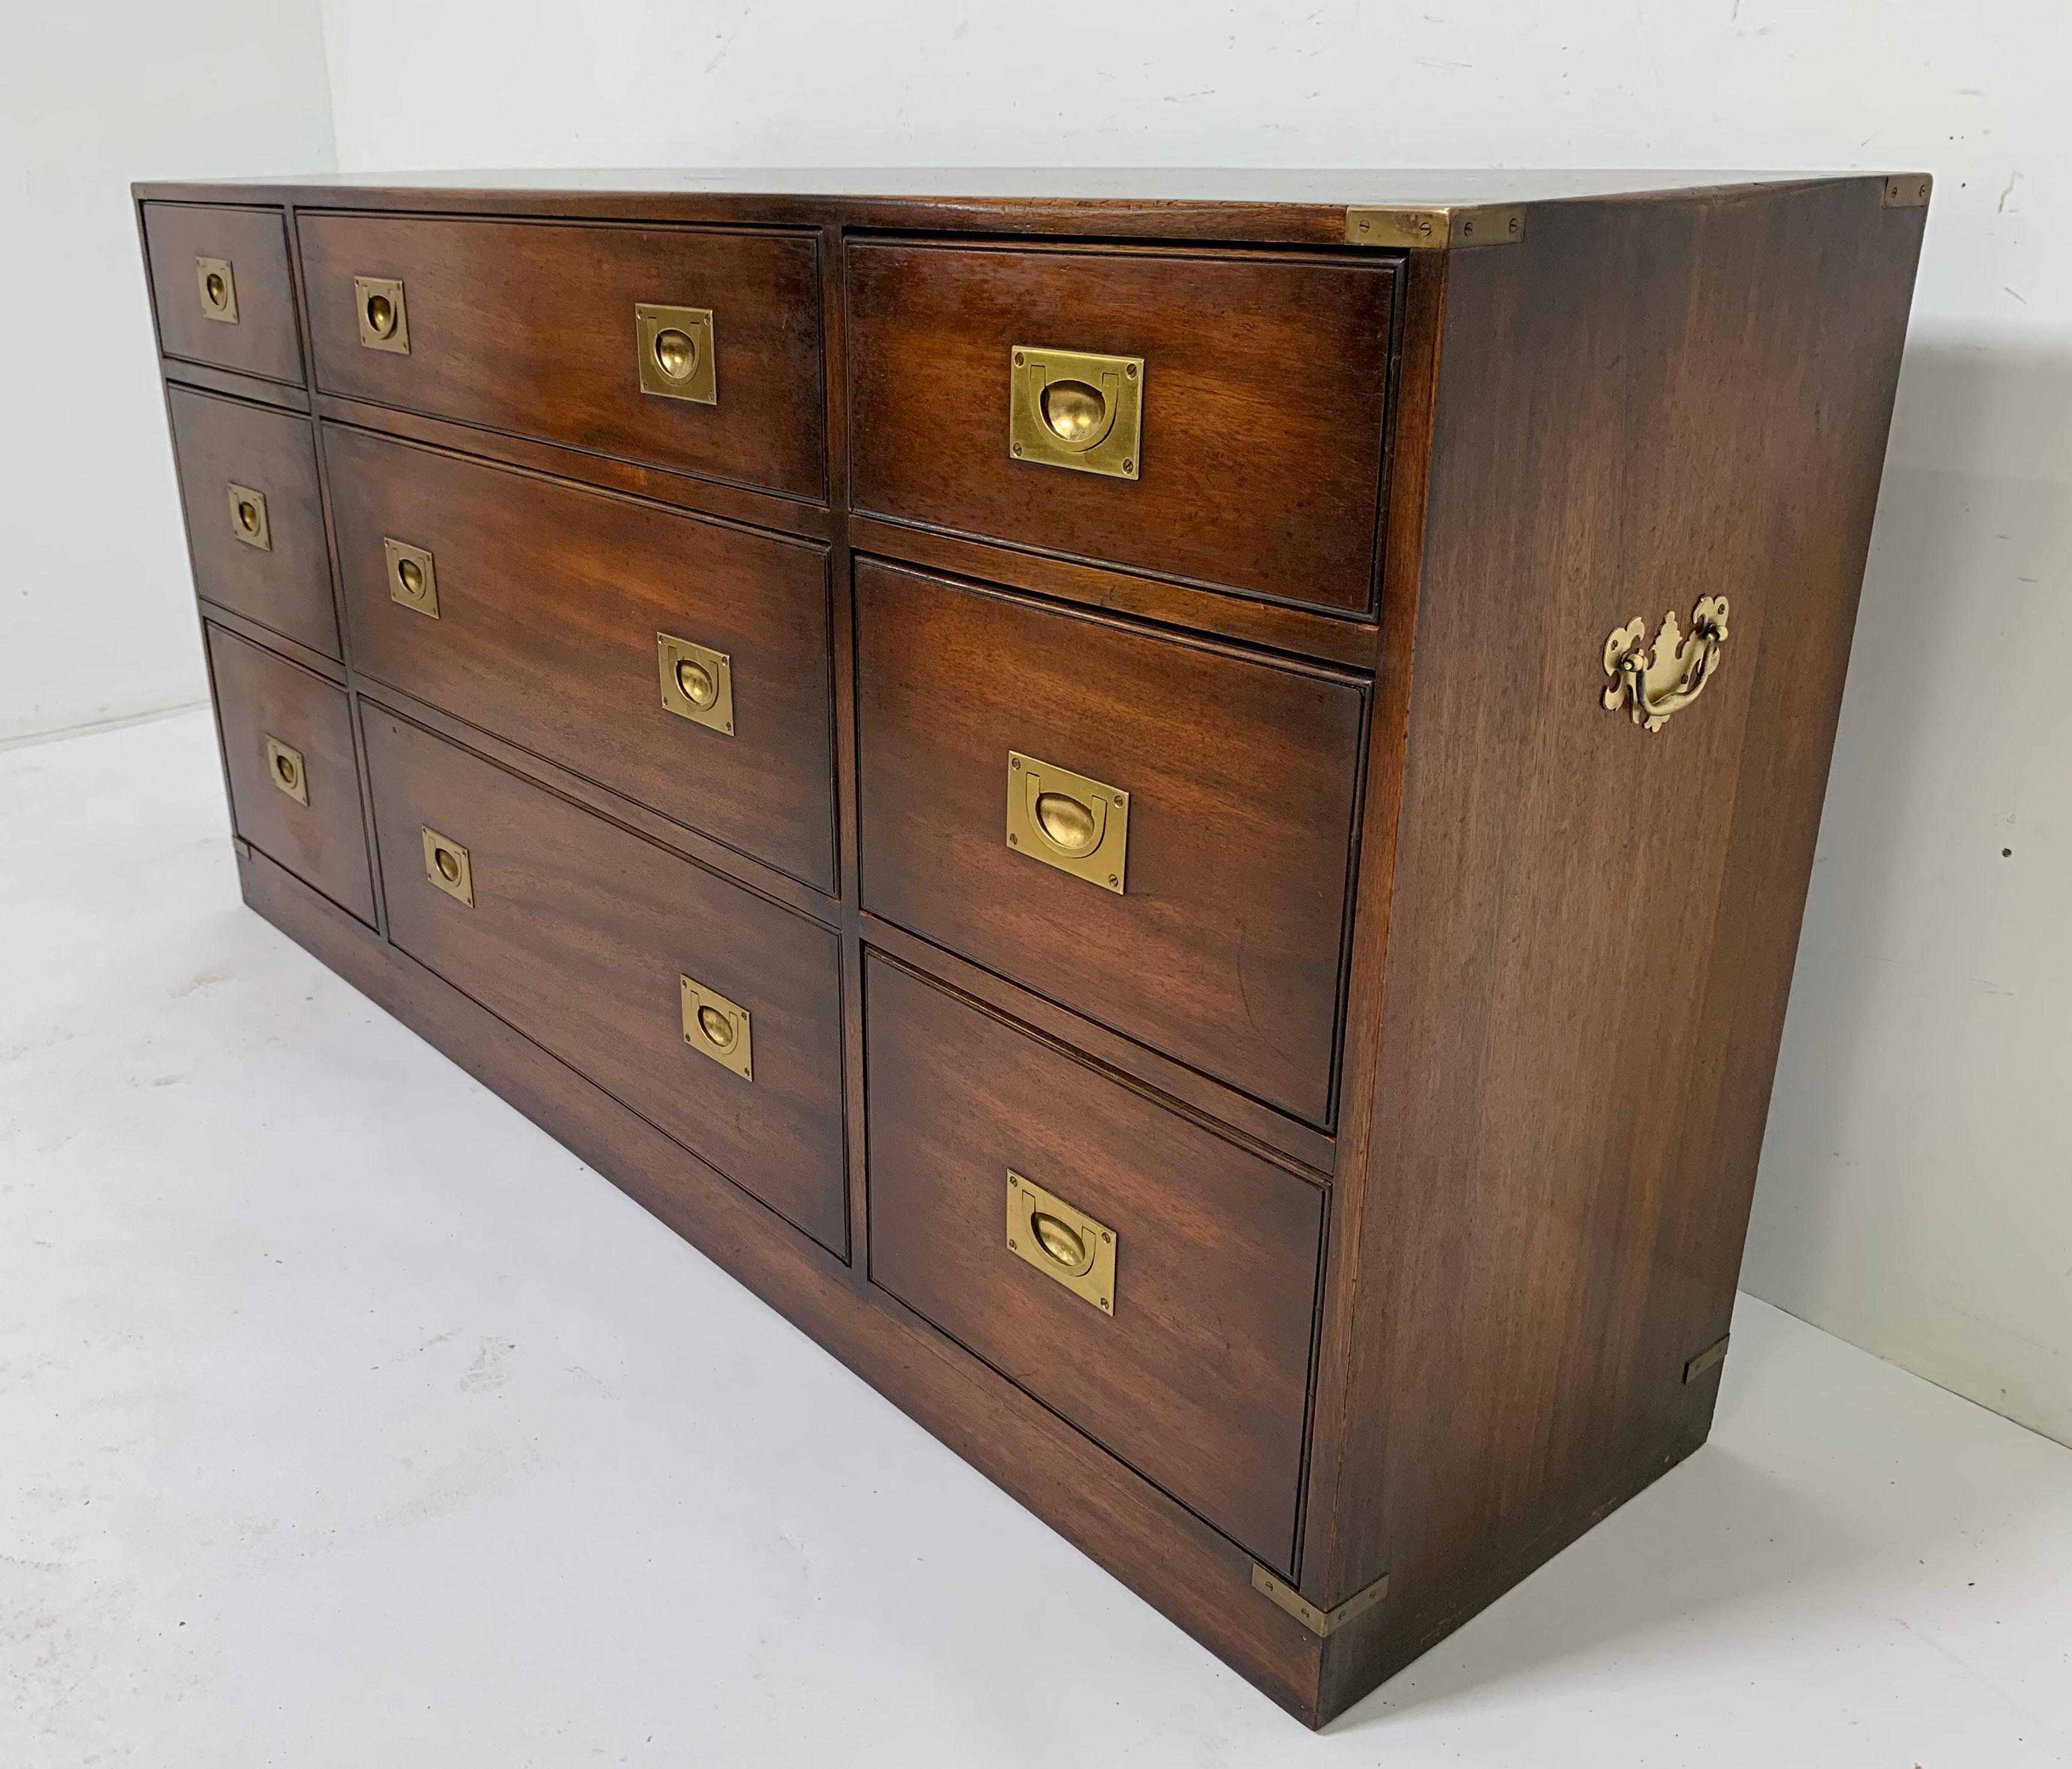 English British Made Bevan Funnell Military Style Campaign Chest, circa 1950s